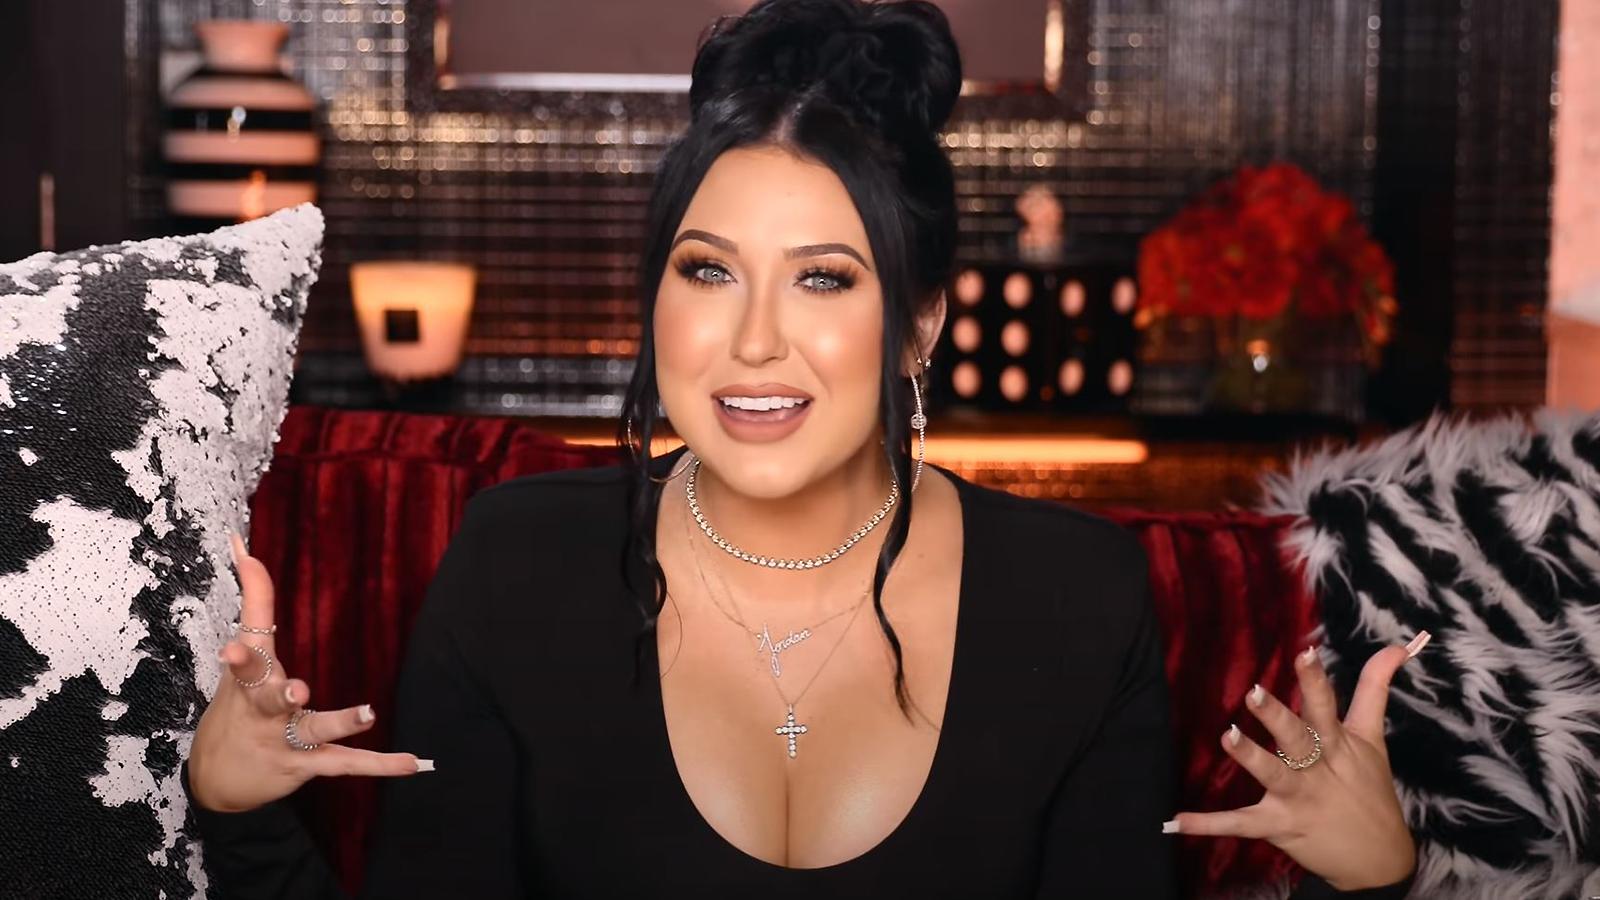 Jaclyn Hill speaks to her fans during a video.